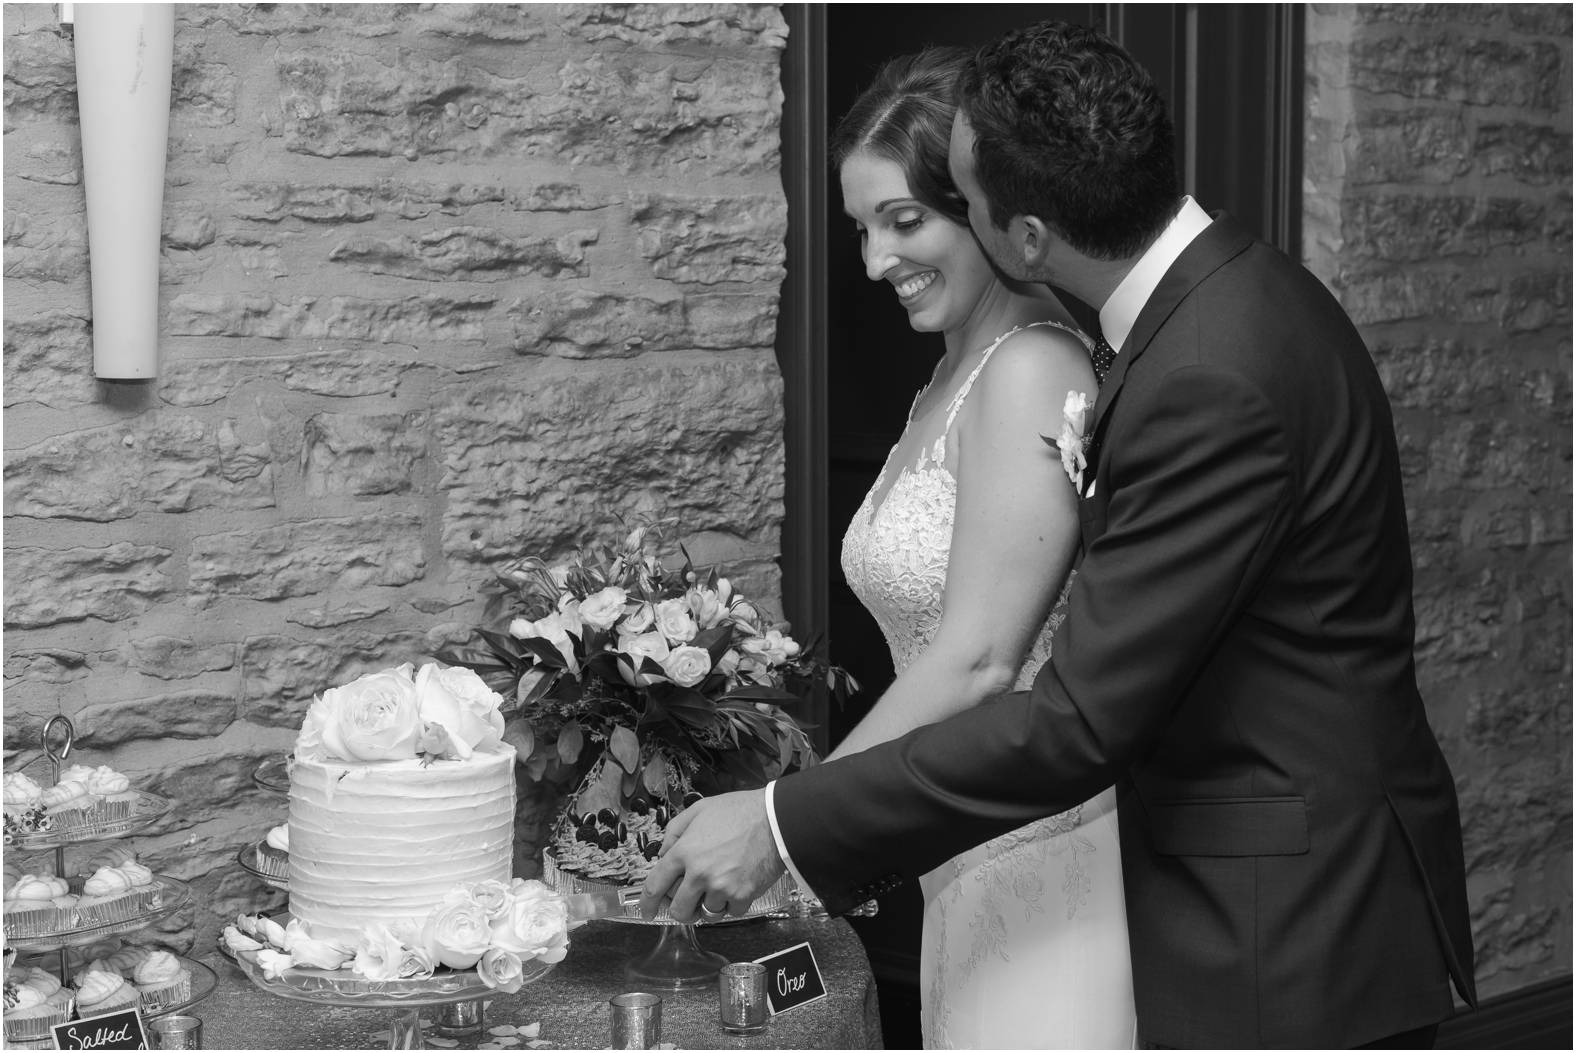 black and white image of bride and groom cutting their wedding cake